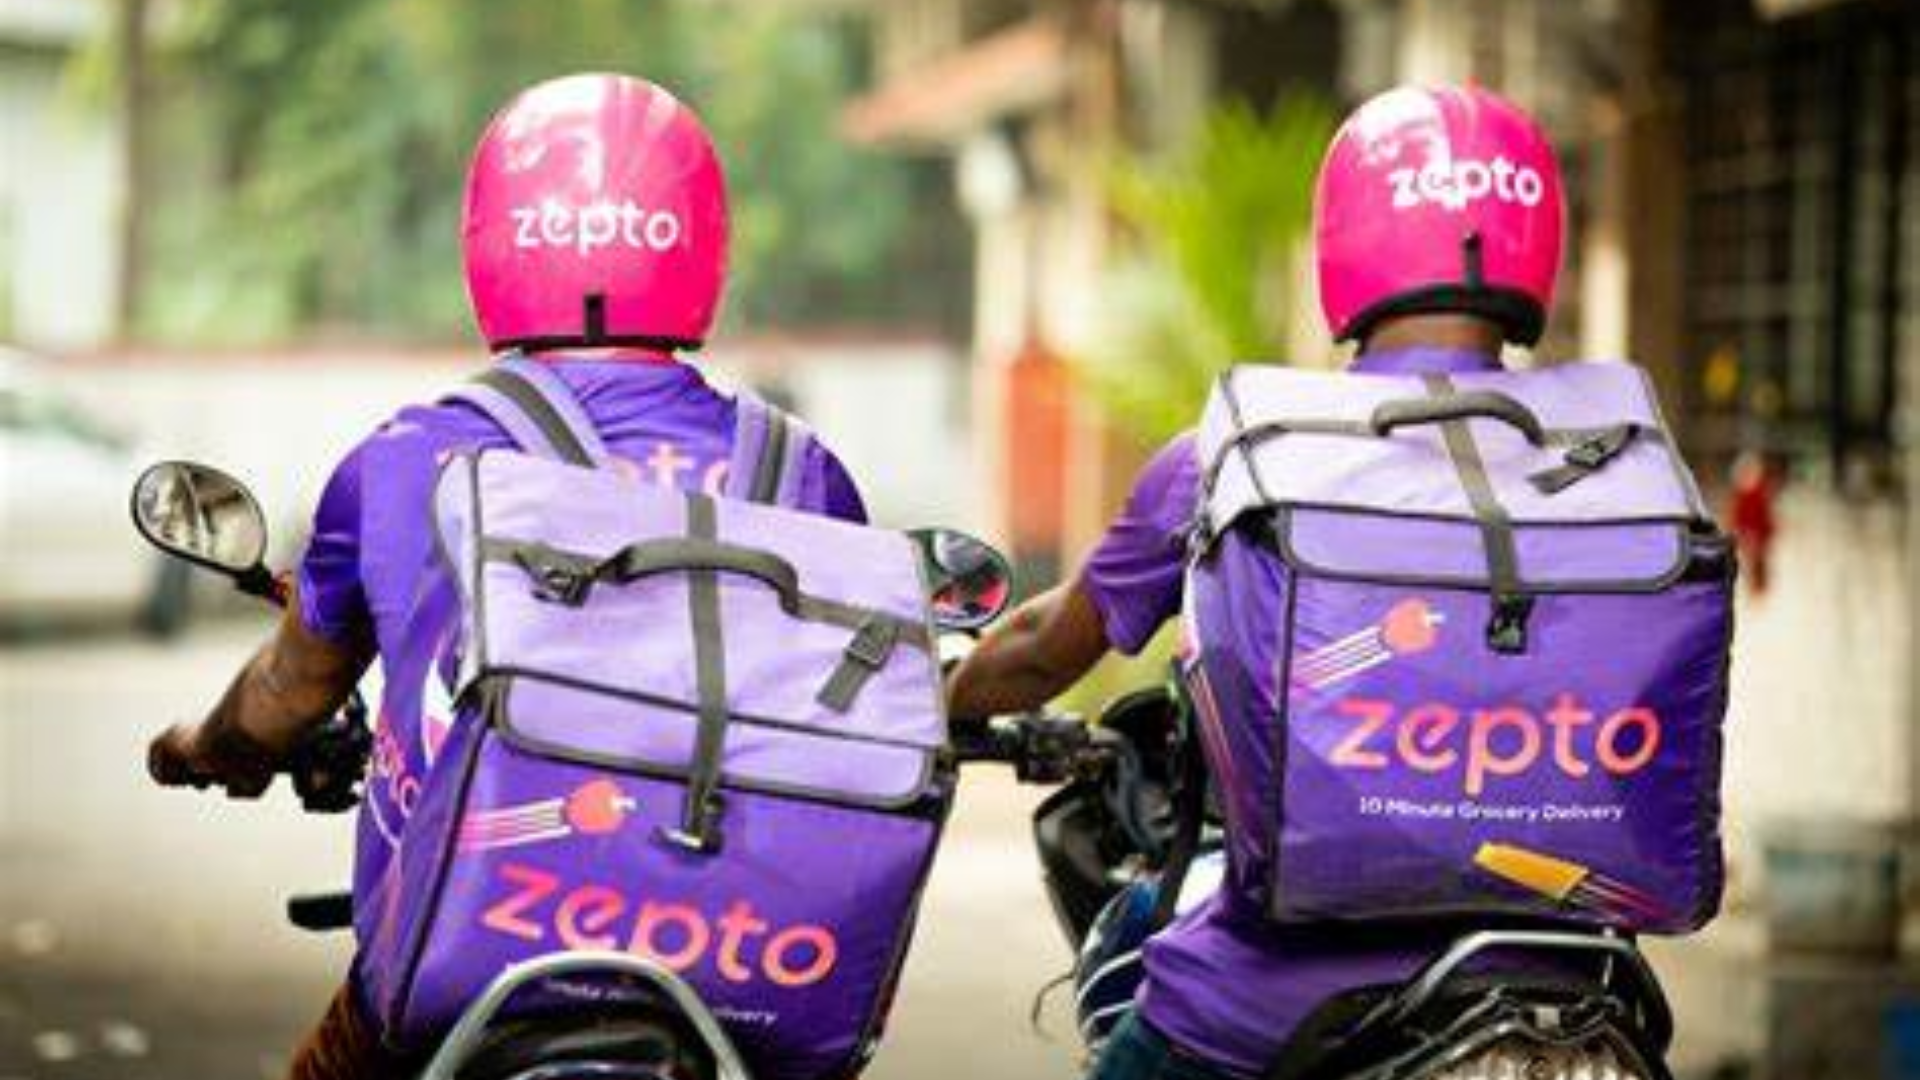 Zepto Gears Up For IPO Following Record $665 Million Funding Round